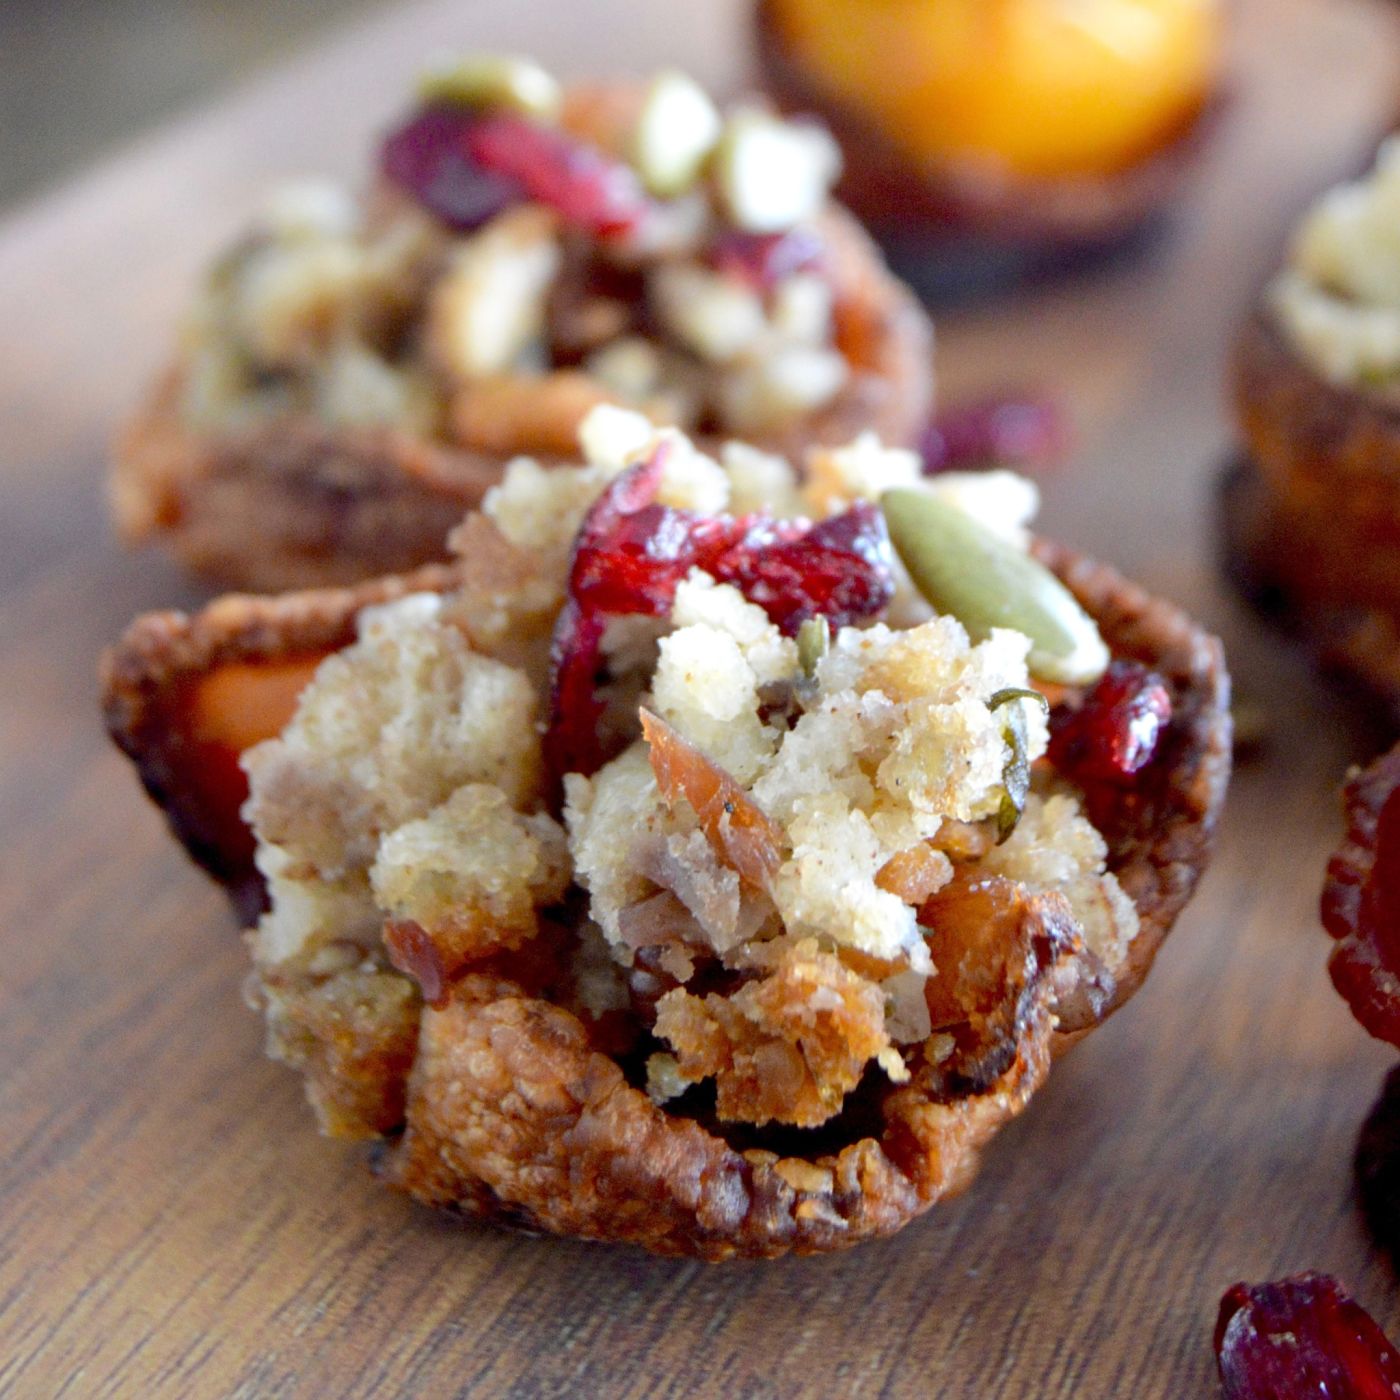 Leftover Stuffing Bacon cups will use up all your leftover stuffing! Make bacon cups, spoon the stuffing in, top with some cranberries and nuts and you have a delicious bite sized snack!